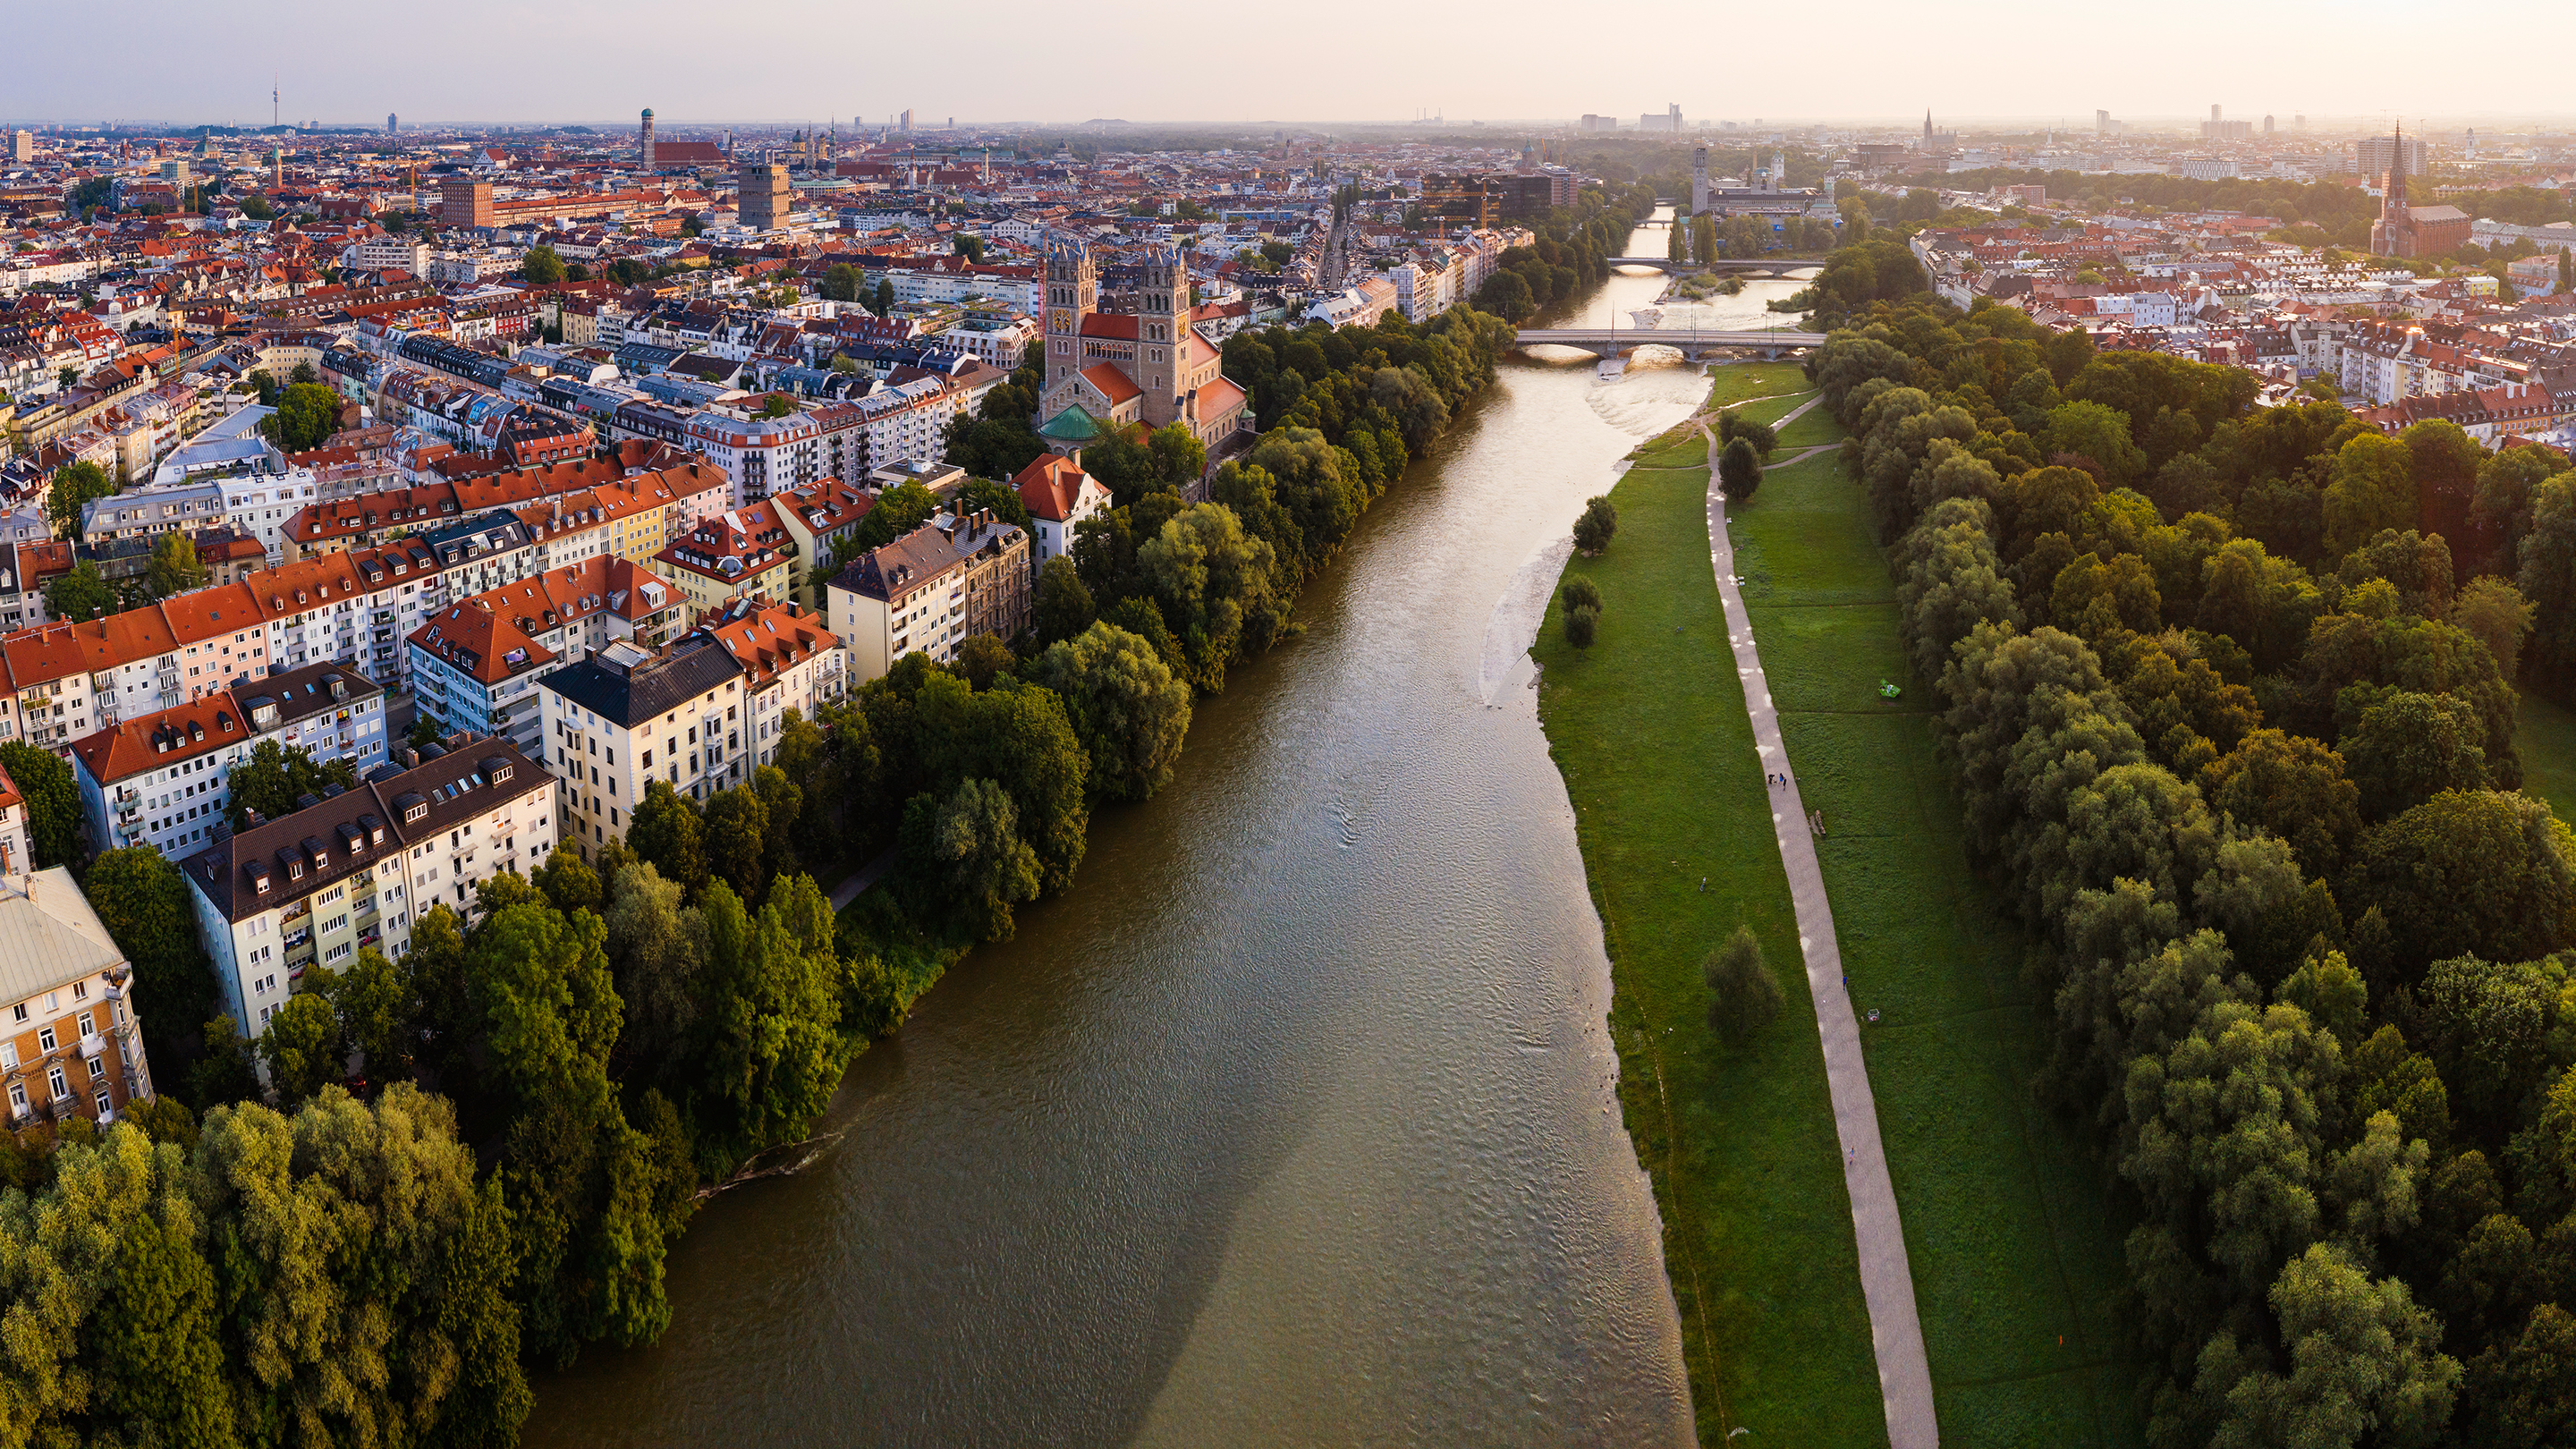 Aerial view of Munich with a river, trees, and a walking path alongside the river.